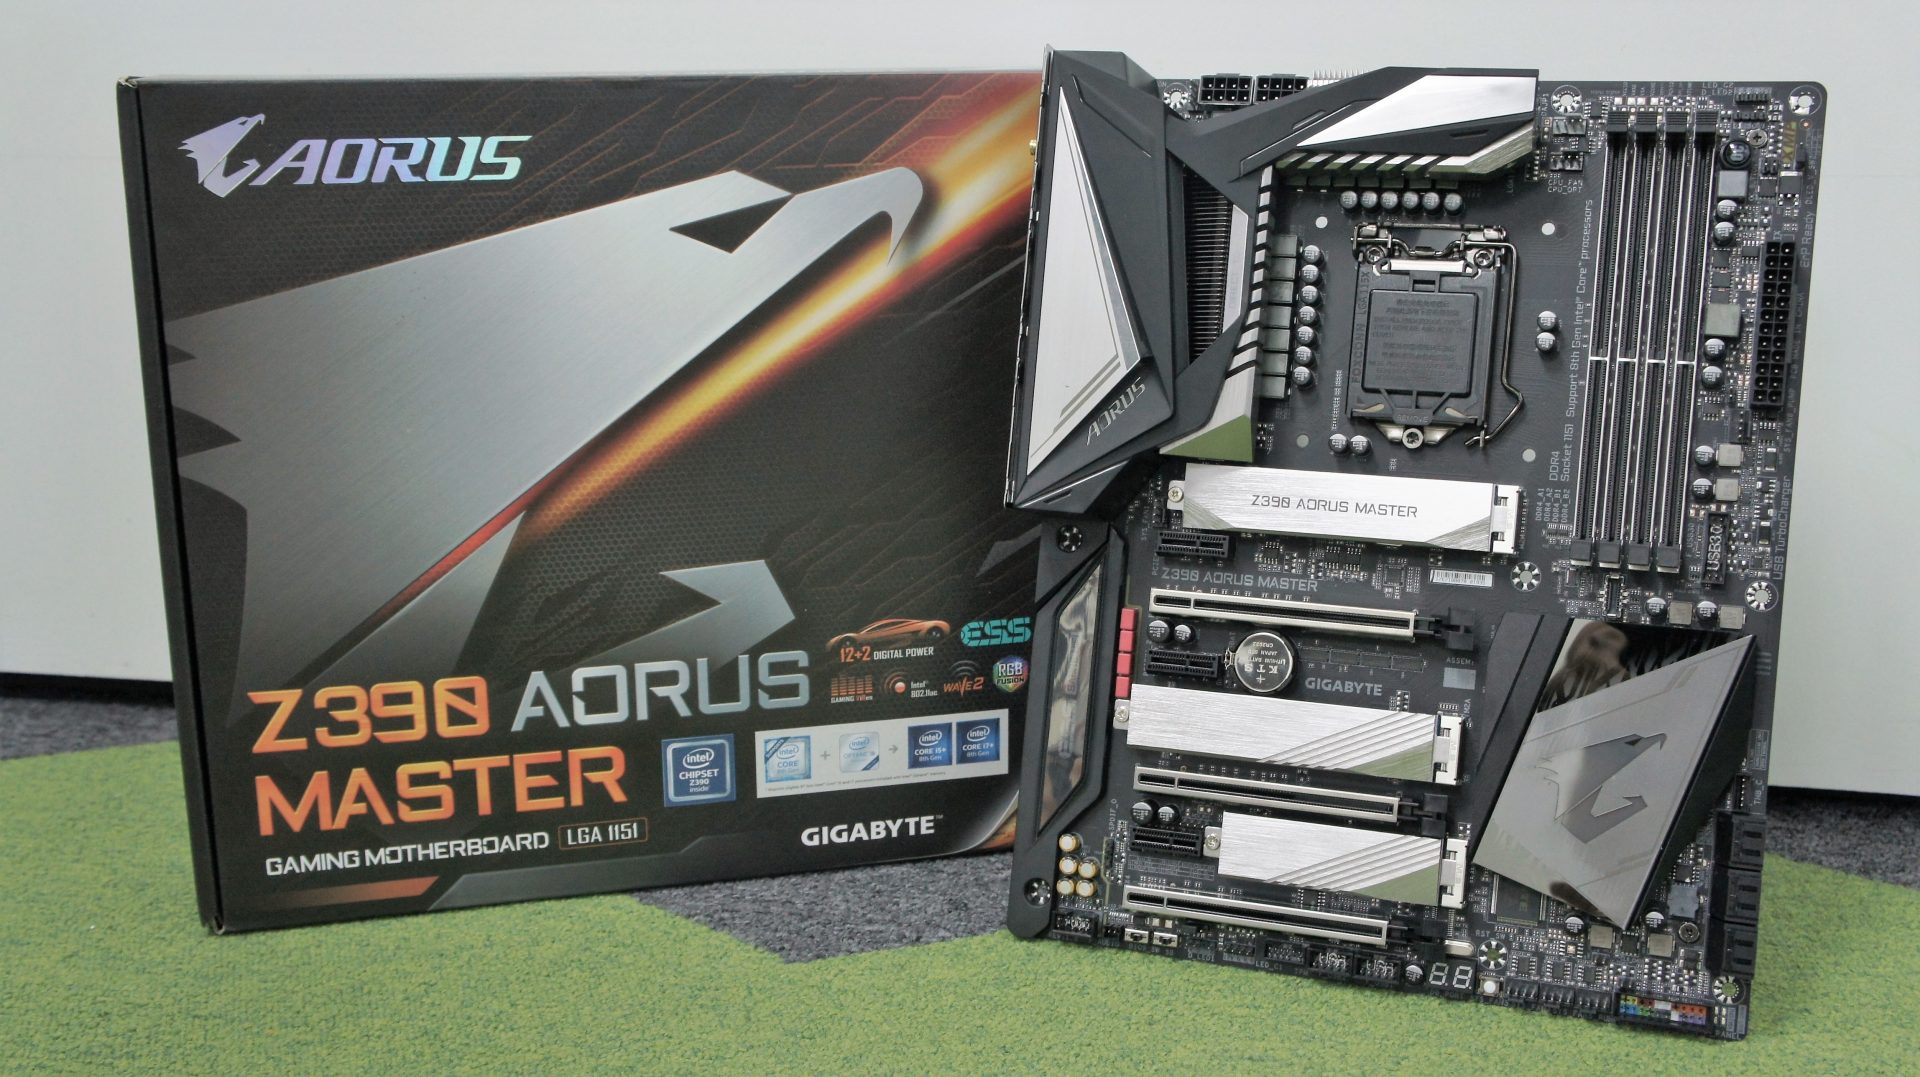 First Looks: Gigabyte Z390 AORUS MASTER Motherboard - The Tech